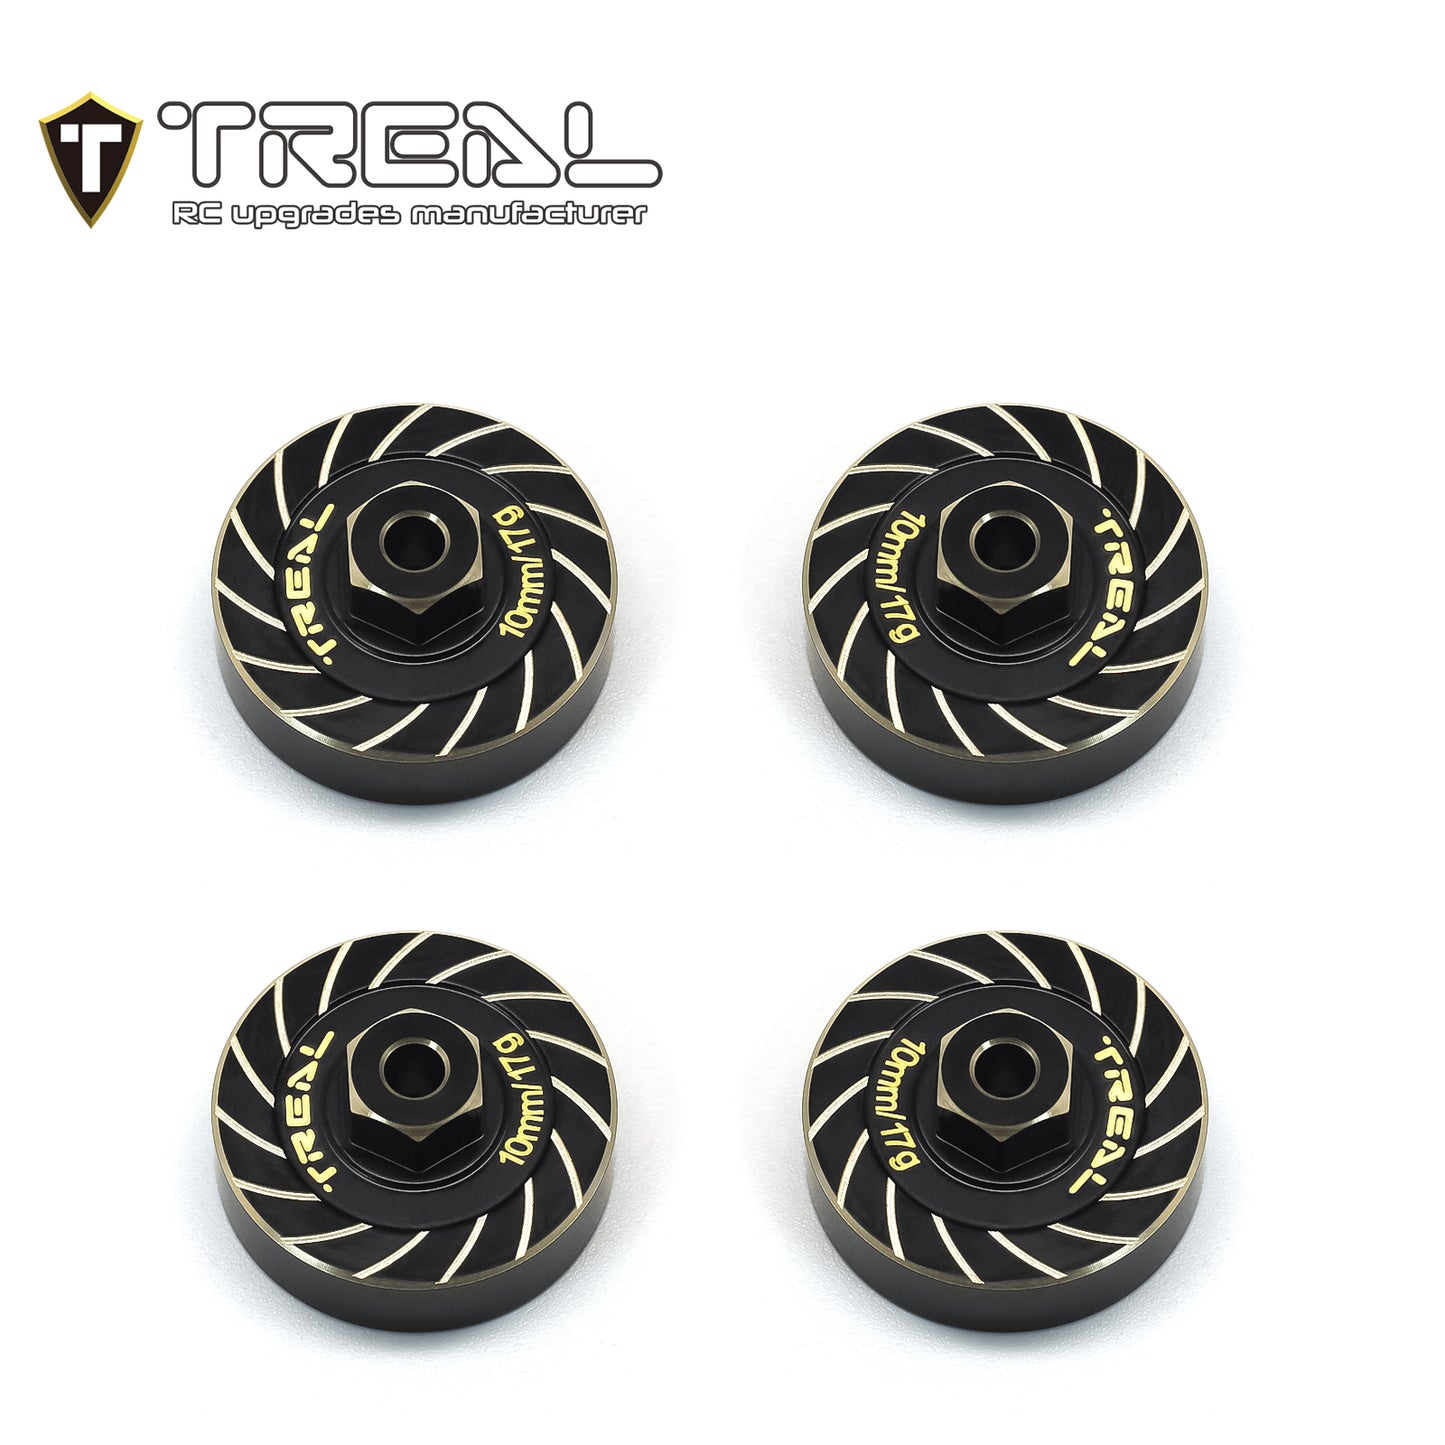 TREAL Brass Extended Wheel Hubs 7mm*10mm Hex, Axle Counter Weight 17g/pc (4pcs) Wheel Spacer for 1/18 TRX4M (Black)